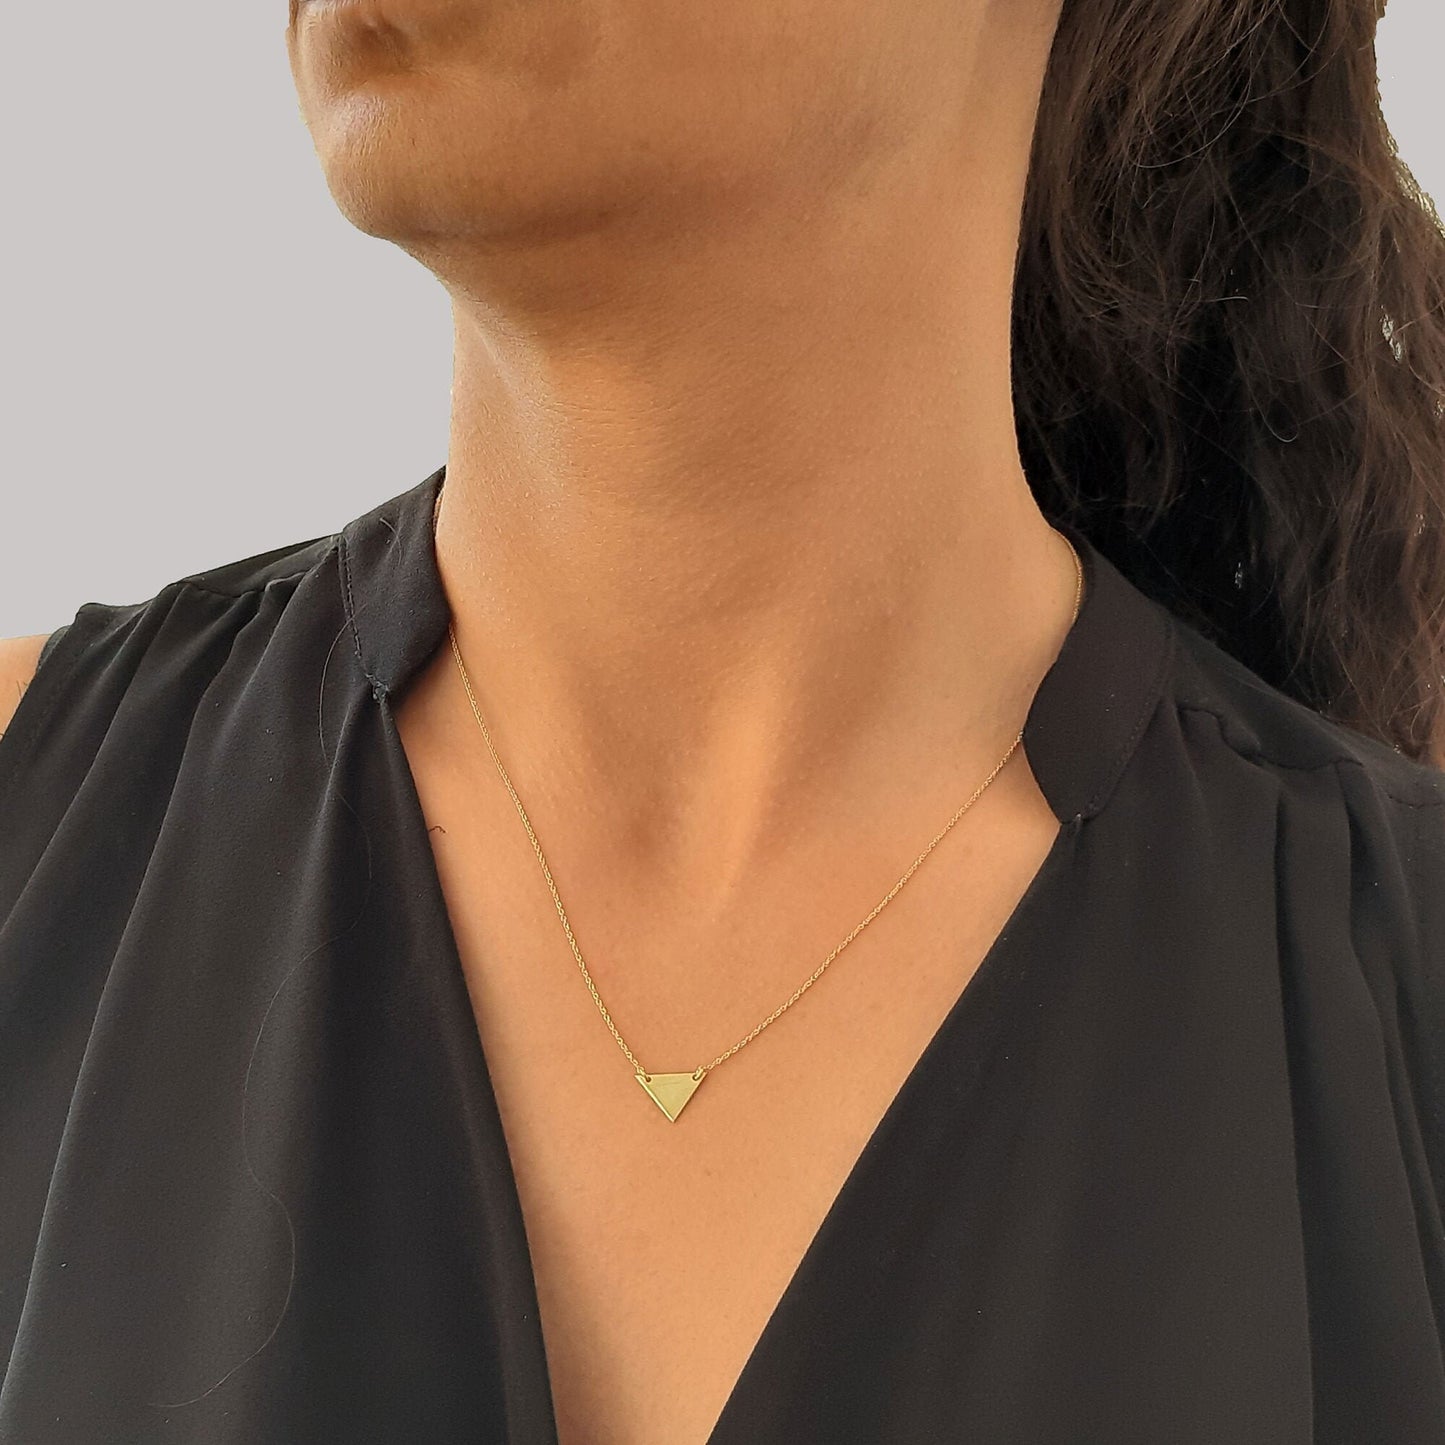 14k Solid Gold Triangle Necklace, Custom Gold Necklace, Yellow Gold Triangle, custom engraved Pendant, Geometric Necklaces for women gift